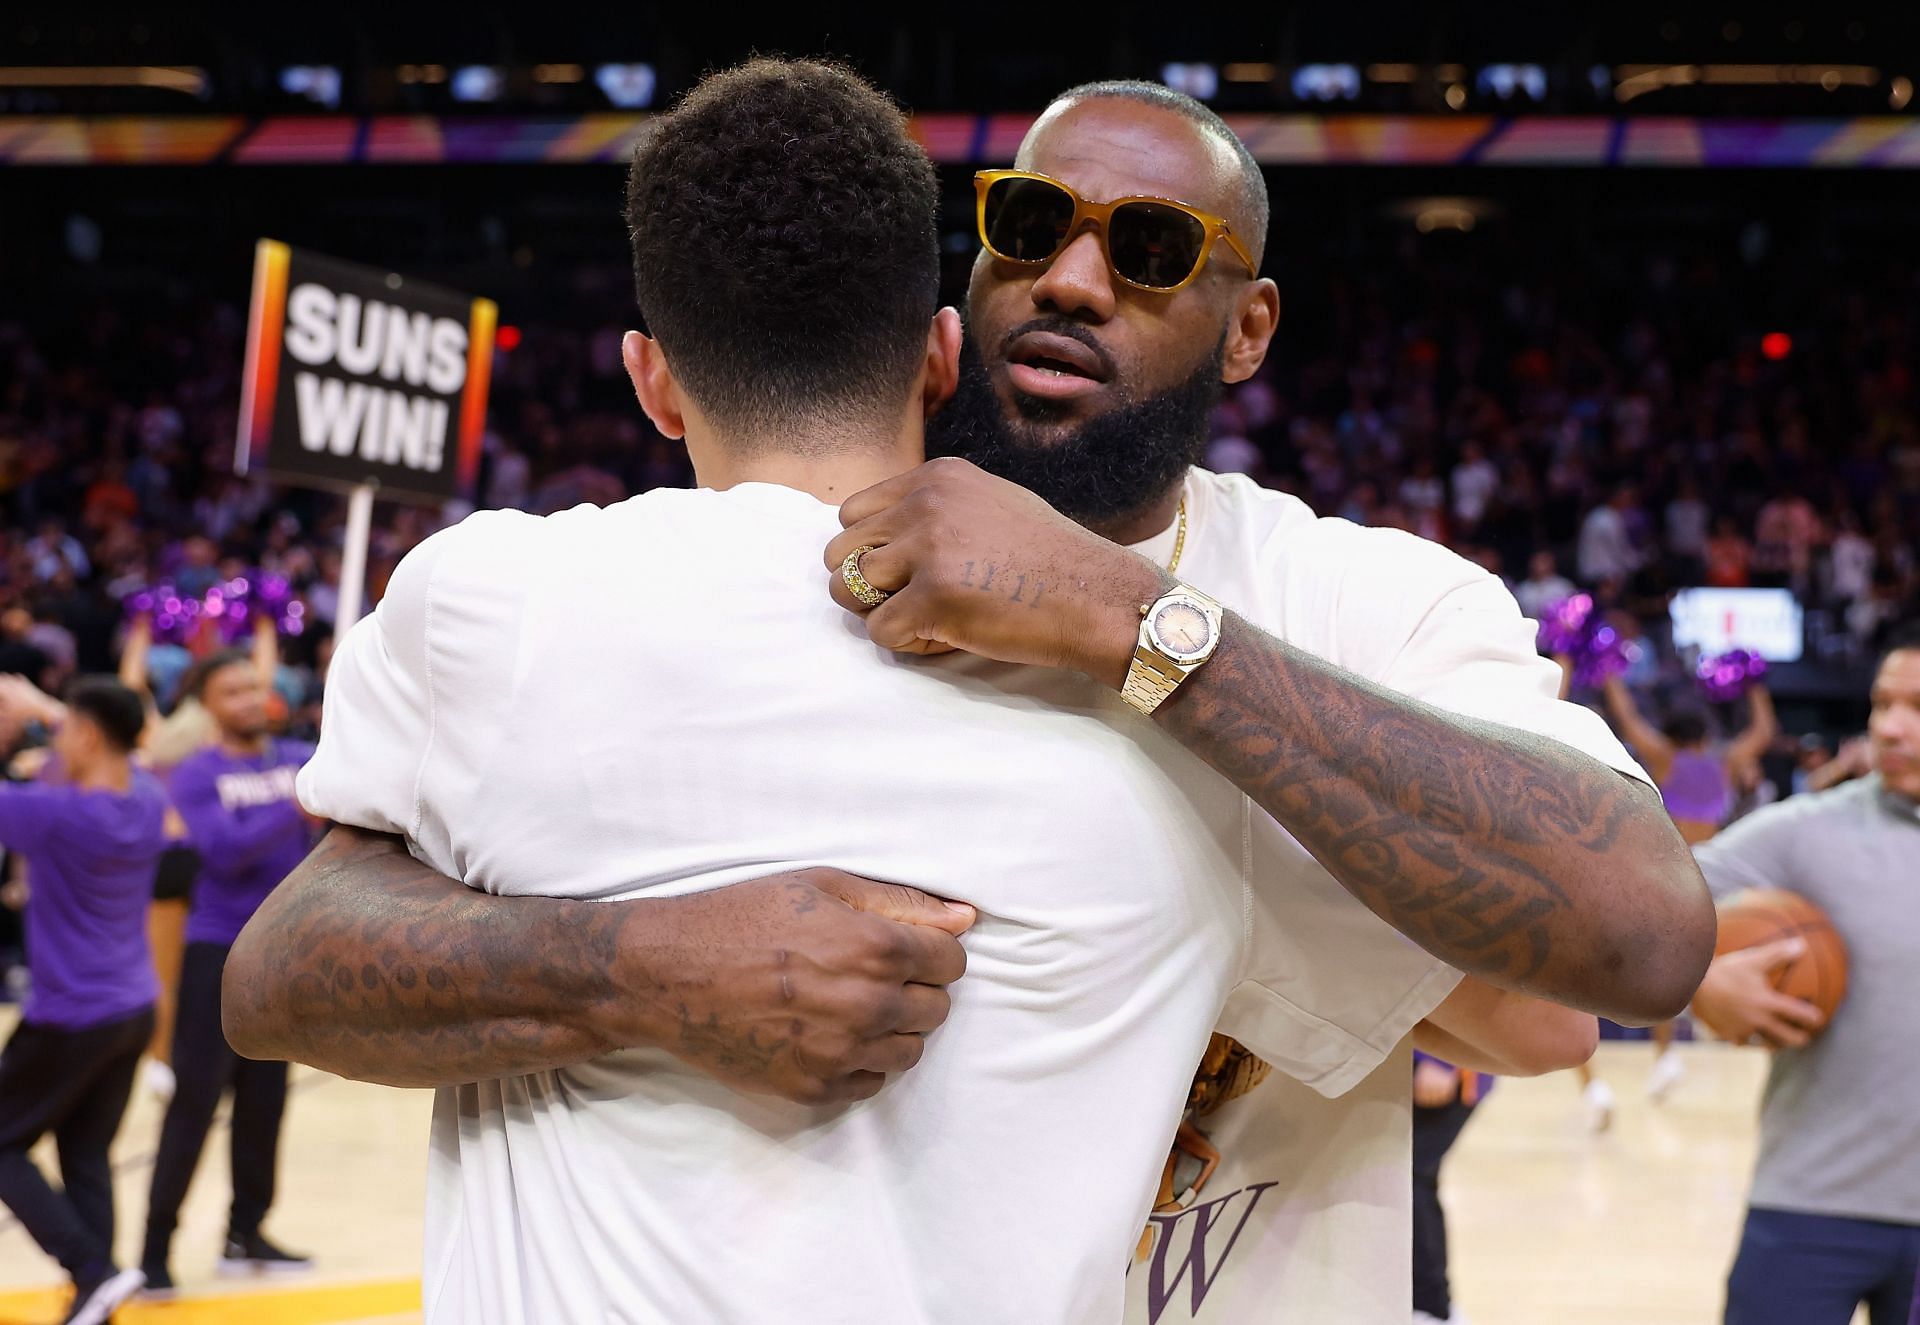 LeBron James and Devin Booker embrace after the game.